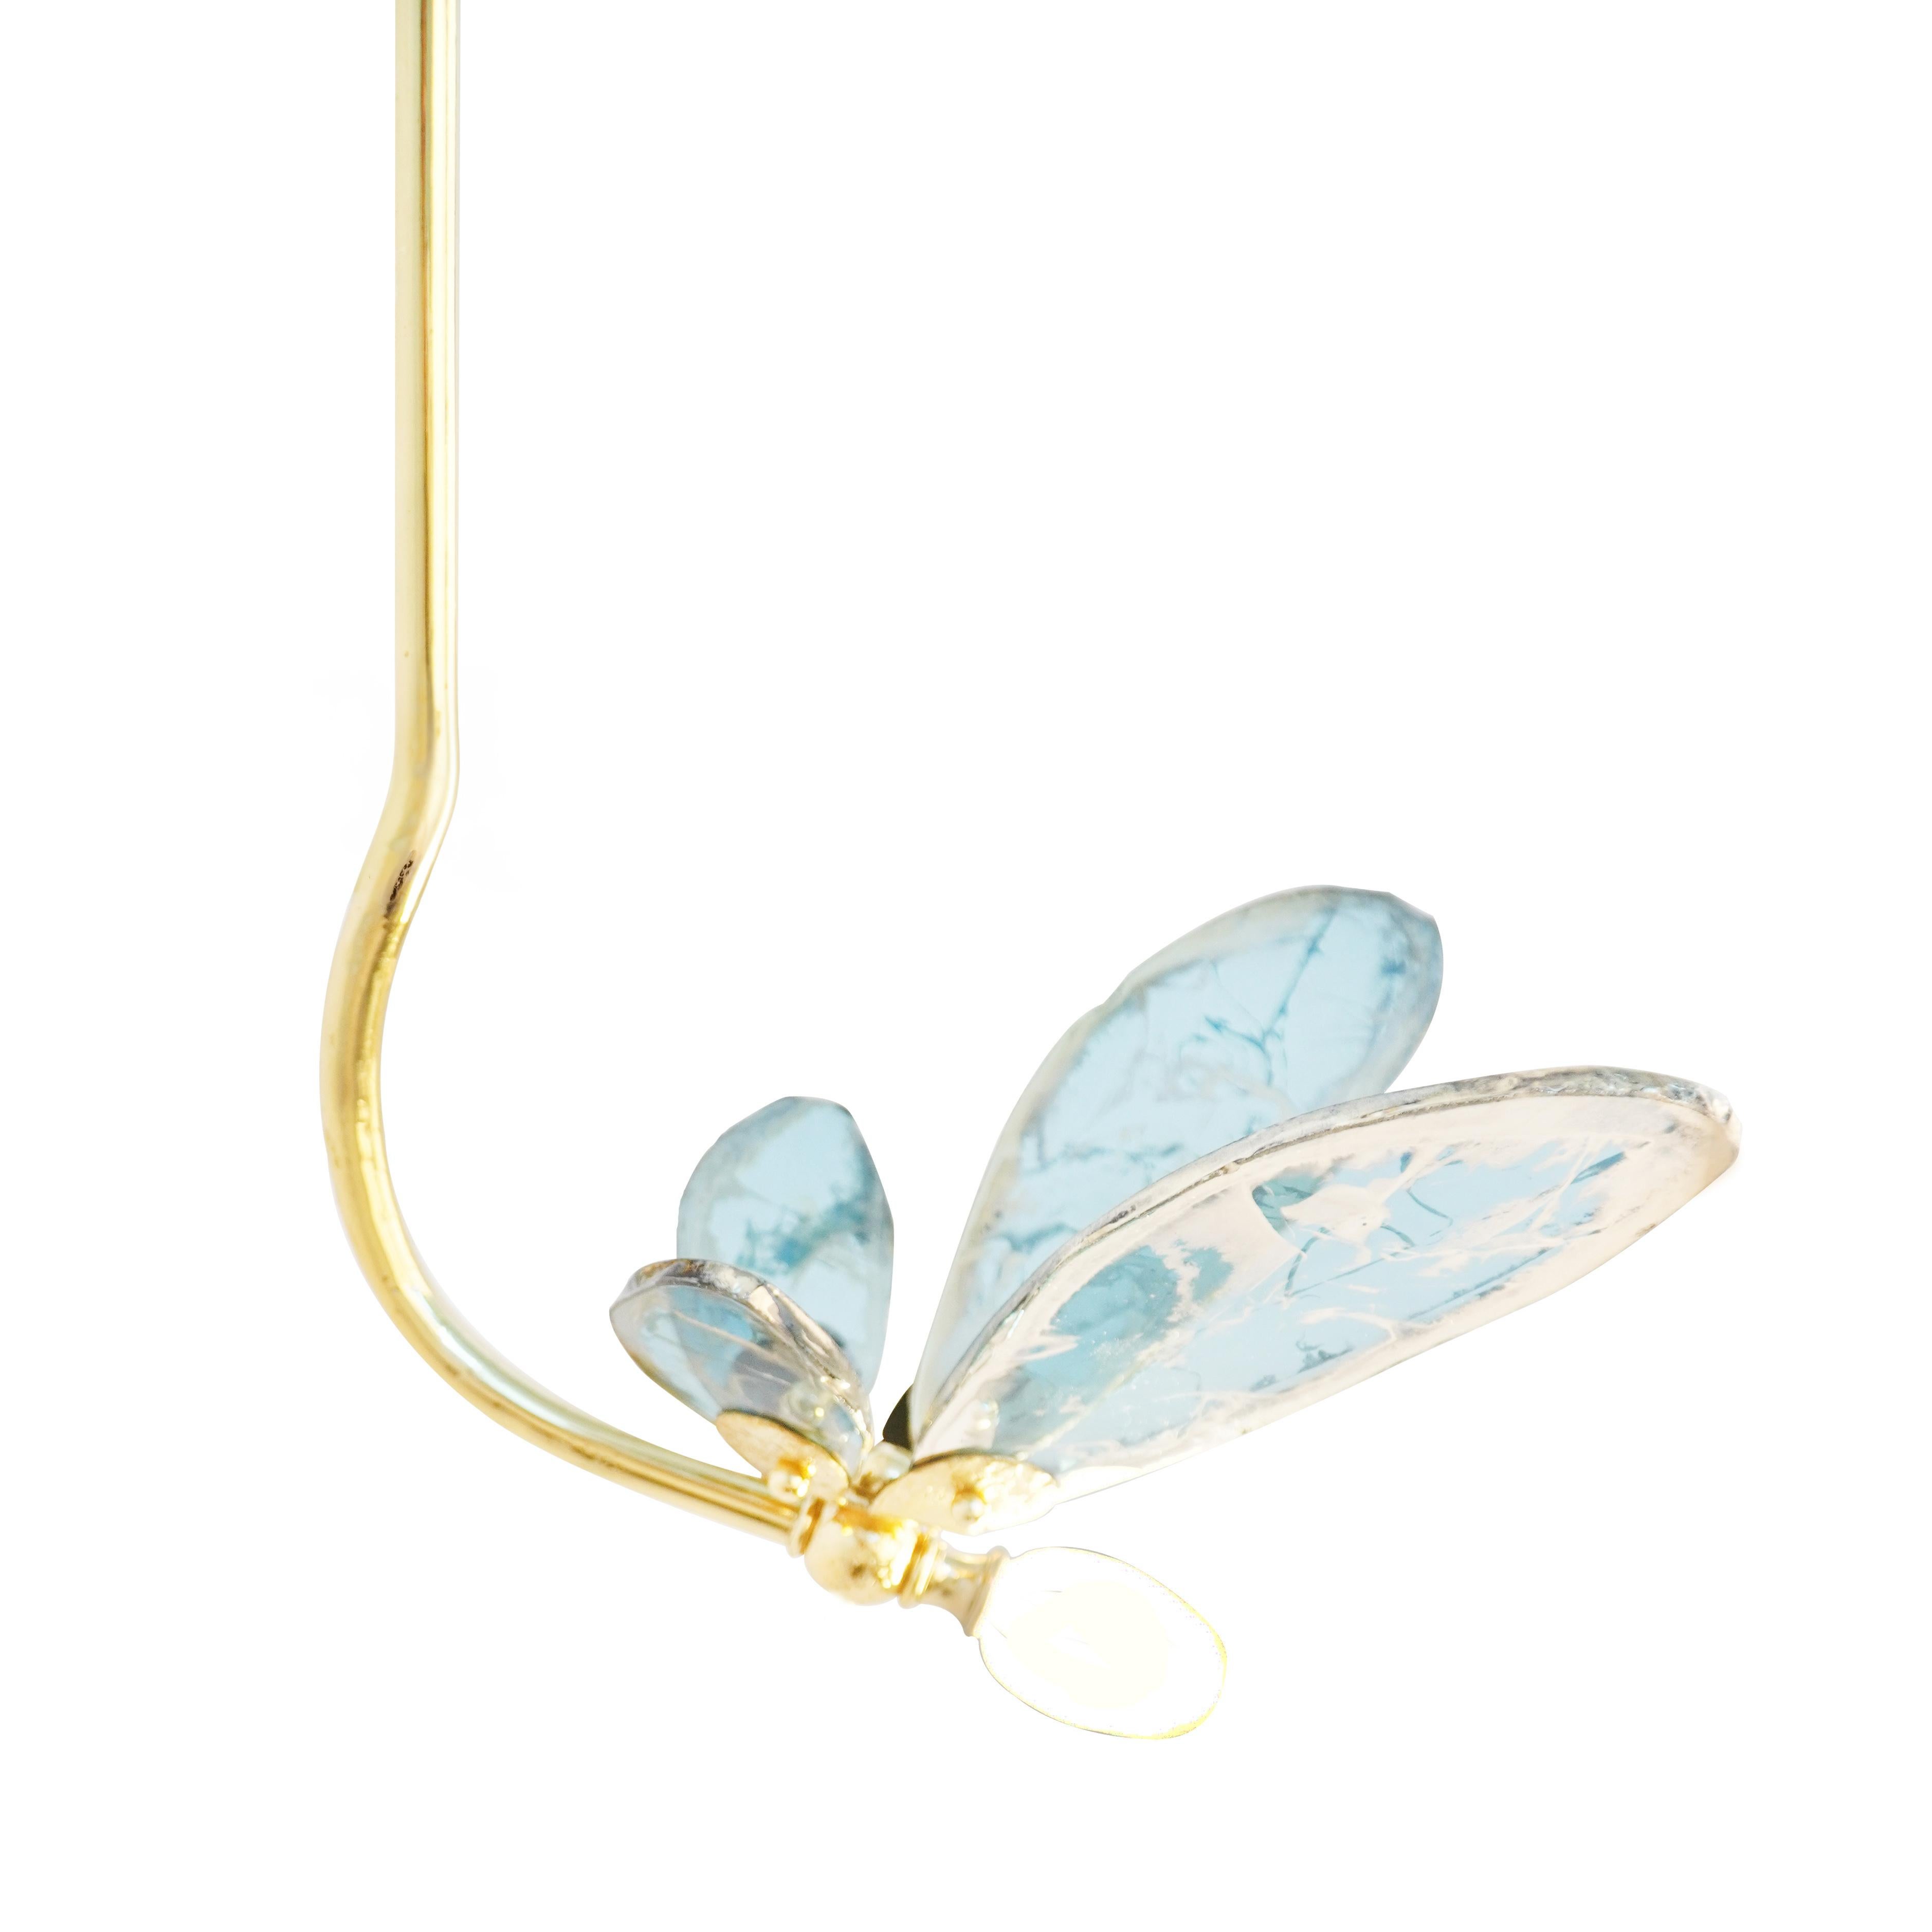 TRILLY the fairy wings of freedom

Small and sophisticated, the Trillies, enterely crafted in Italy, are the little sisters of our Butterfly models, they bring an ethereal allure to your home décor, thanks to their colored and silvered glass